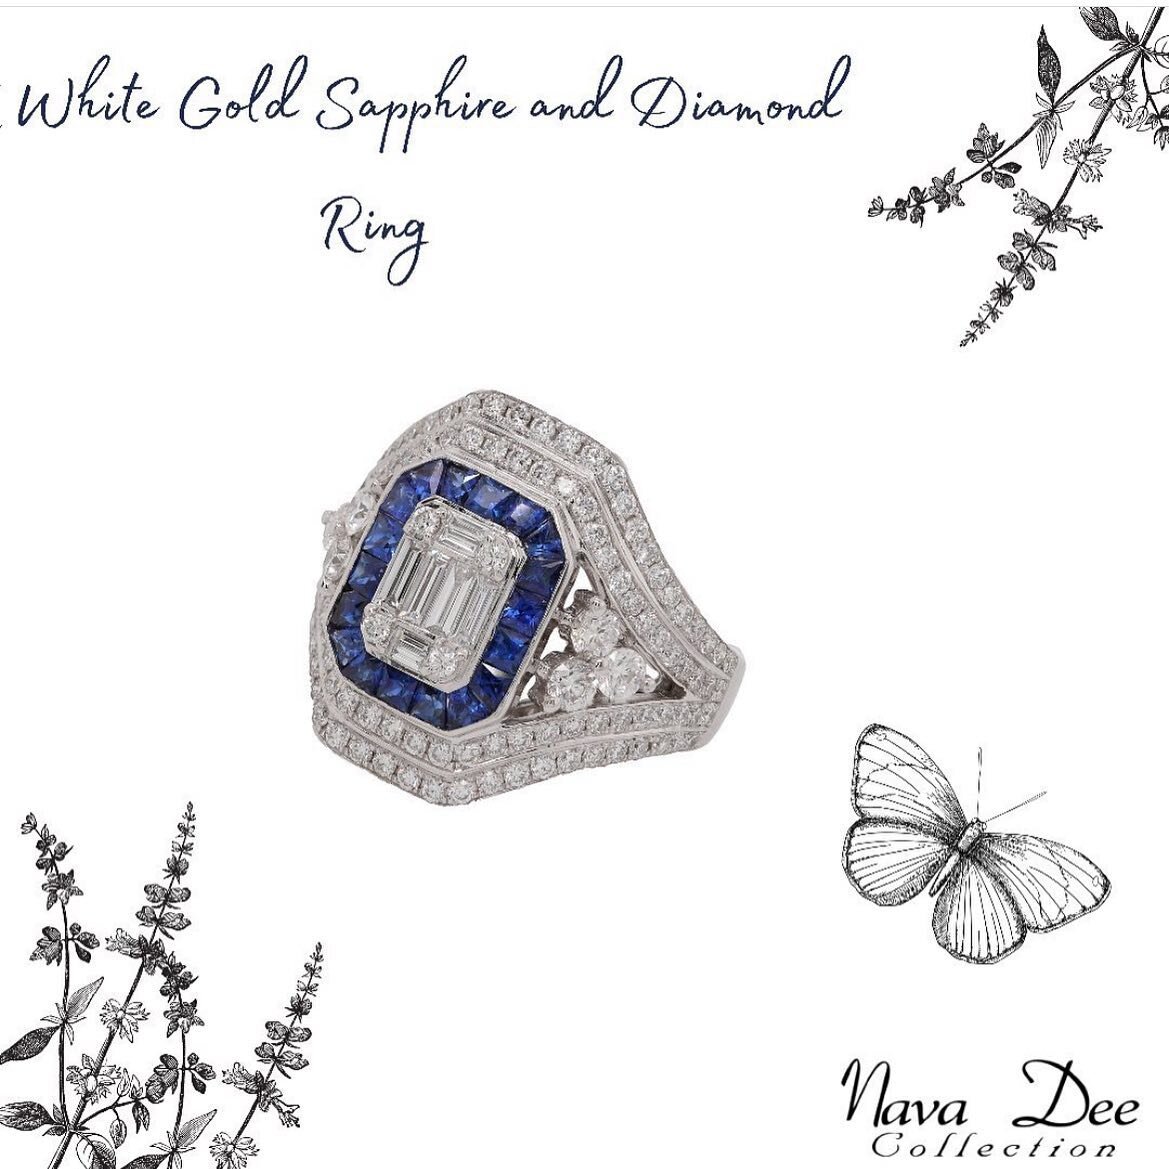 ✨Dazzling Diamonds

✨Discover The Gold Collection at Nava Dee.

✨14k White Gold Diamond and Sapphire Art Deco Ring.

Want to see this beauty in person? DM for store locations 📍

#jewelry #accessories #gold #giftideas #silver #ring #jewelryaddict #ma